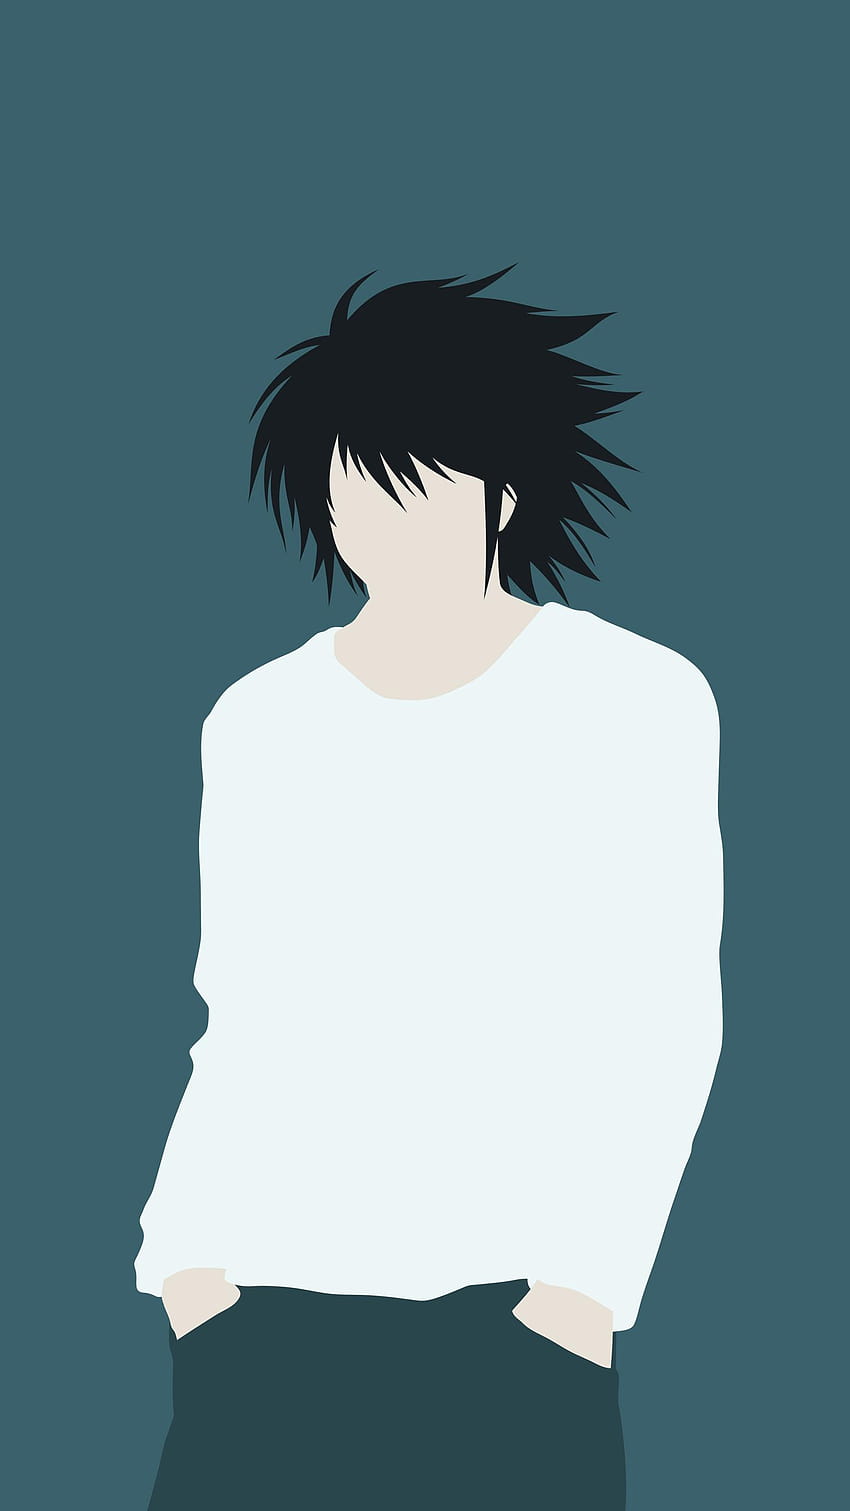 L' for phone [1440x2560] : deathnote, death note phone HD phone wallpaper